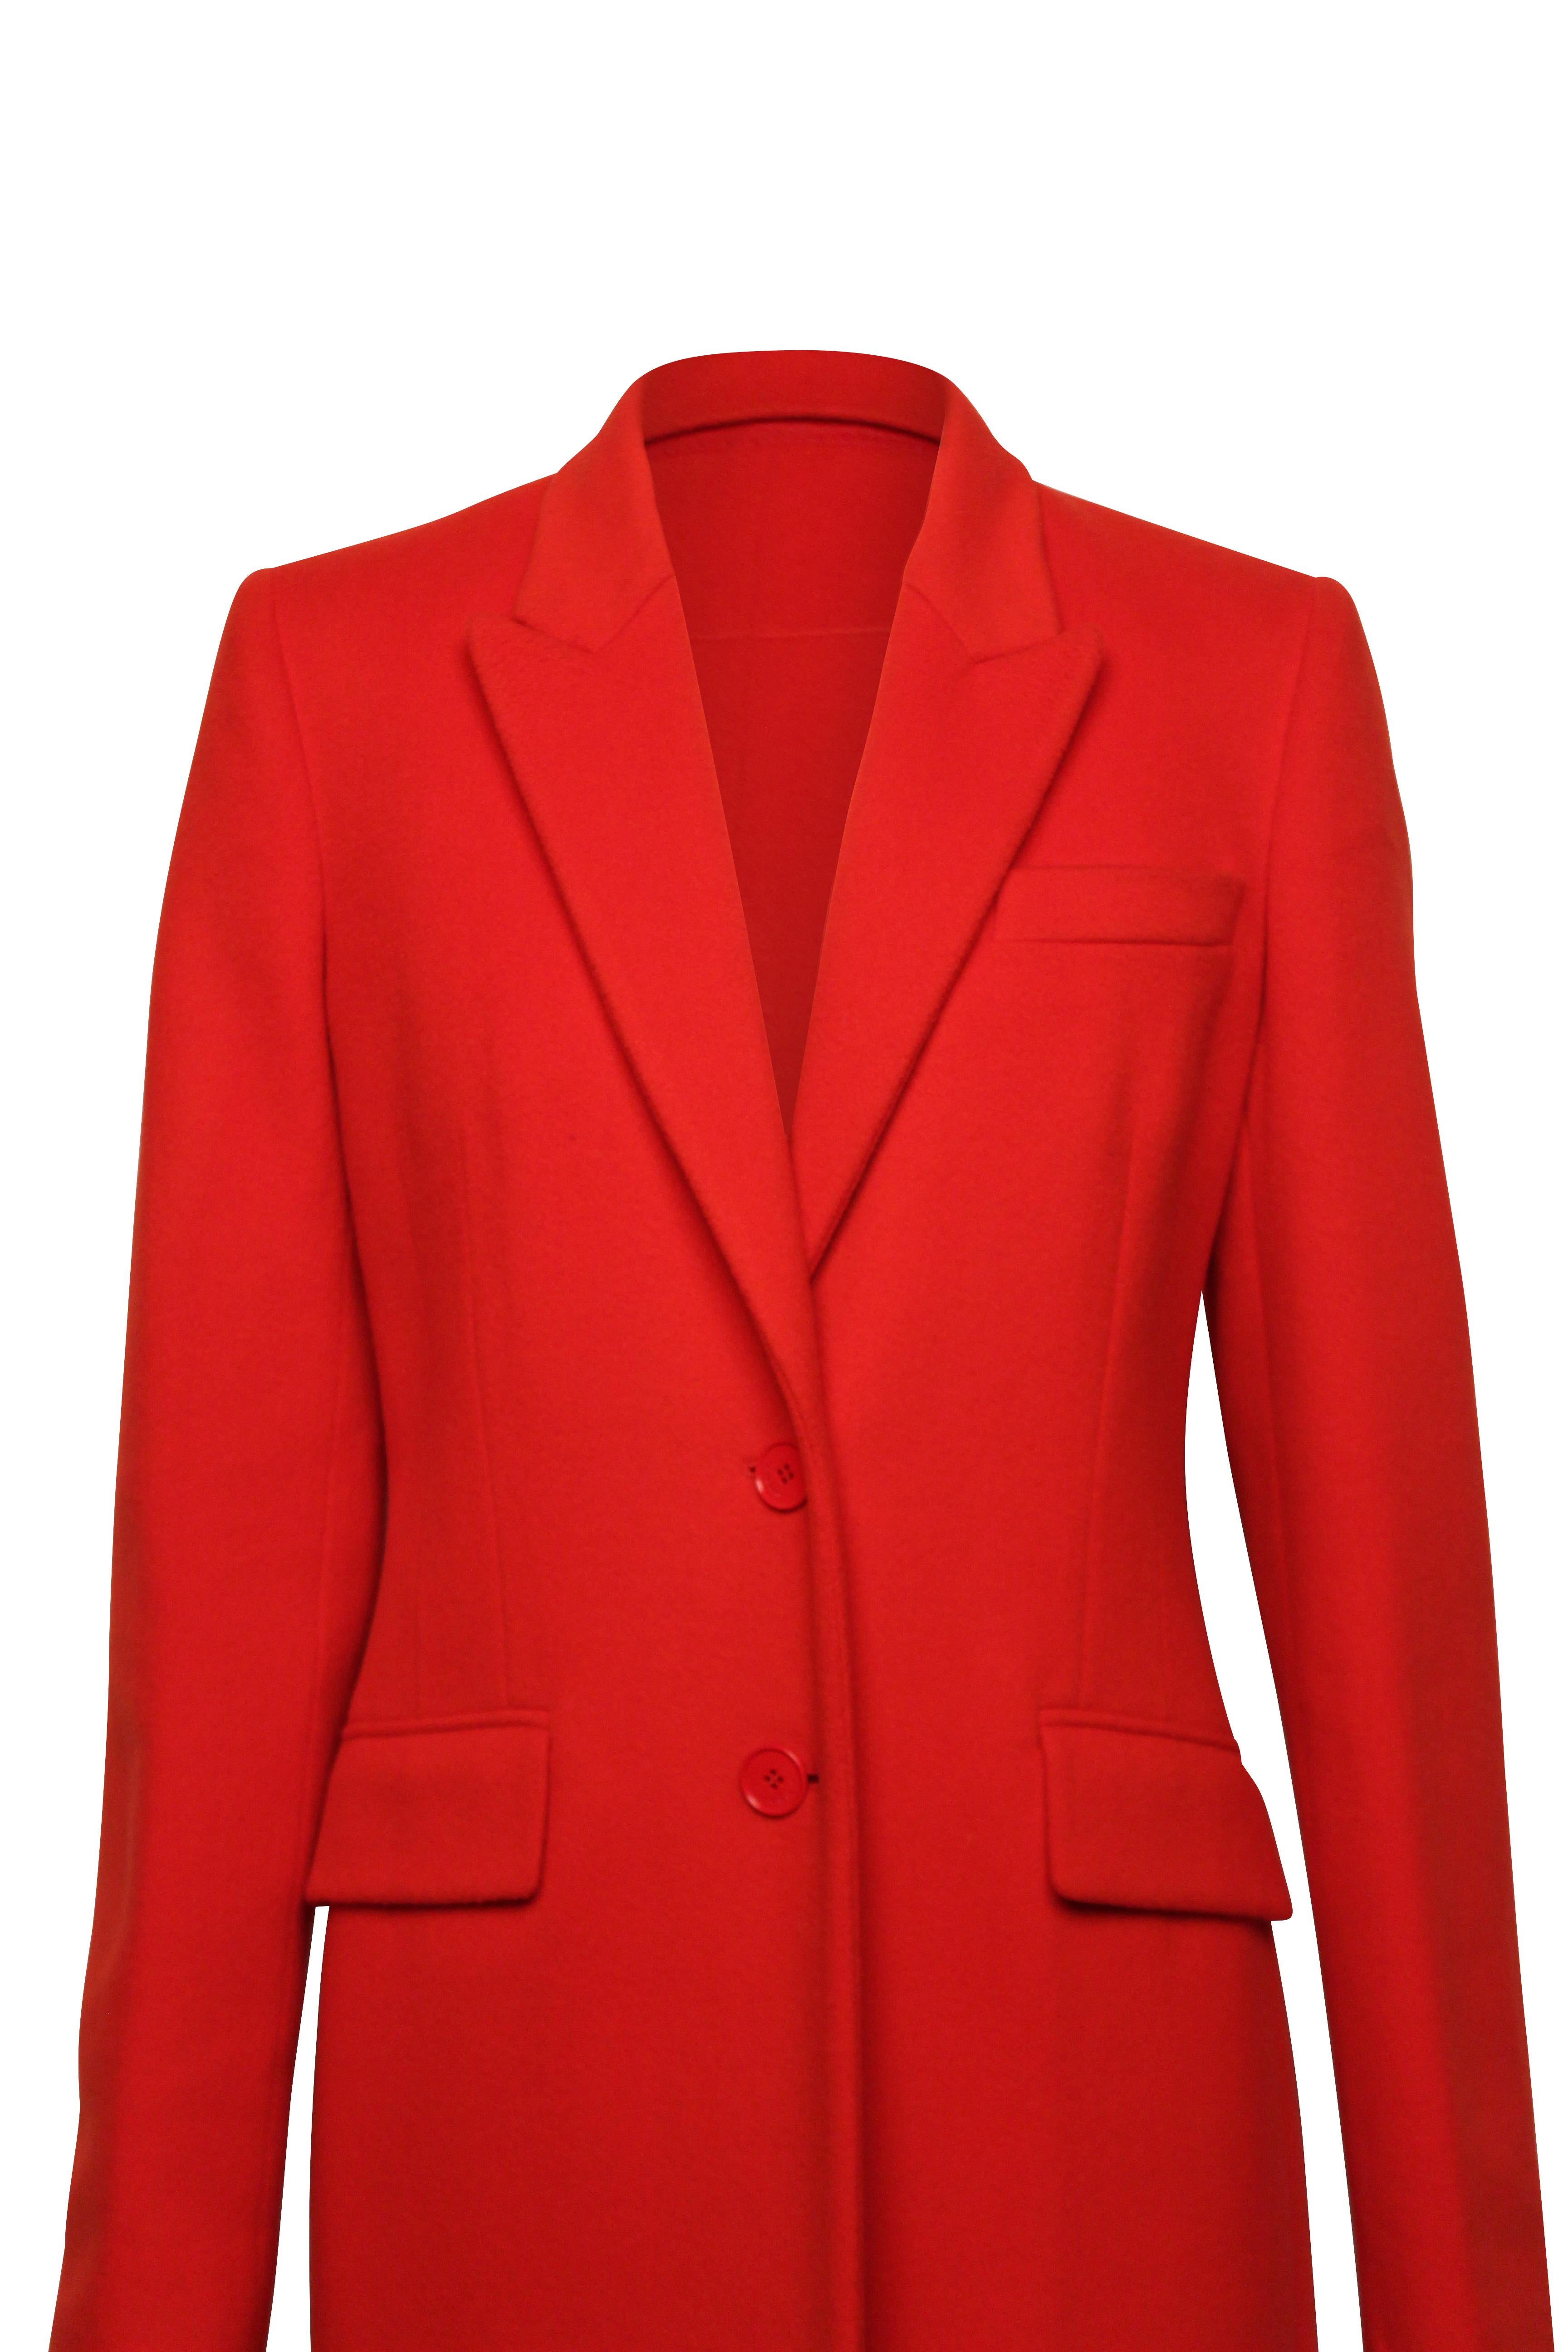 Beautifully cut, bright tomato red, single breasted wool and cashmere Givenchy coat. Size 38. Made in Italy.
